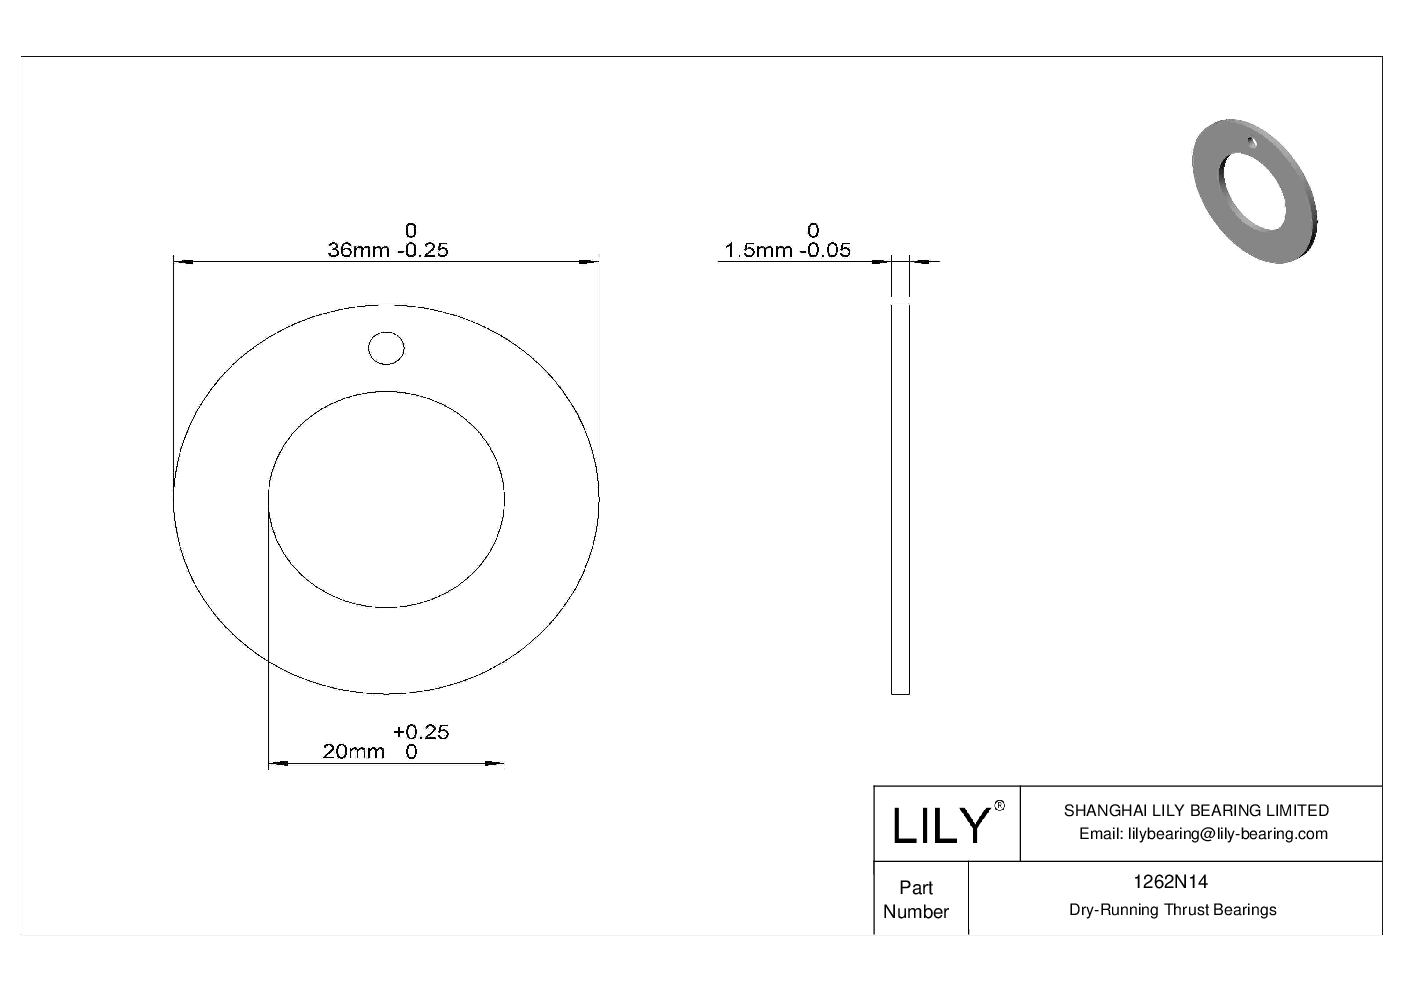 BCGCNBE High-Load Dry-Running Thrust Bearings cad drawing